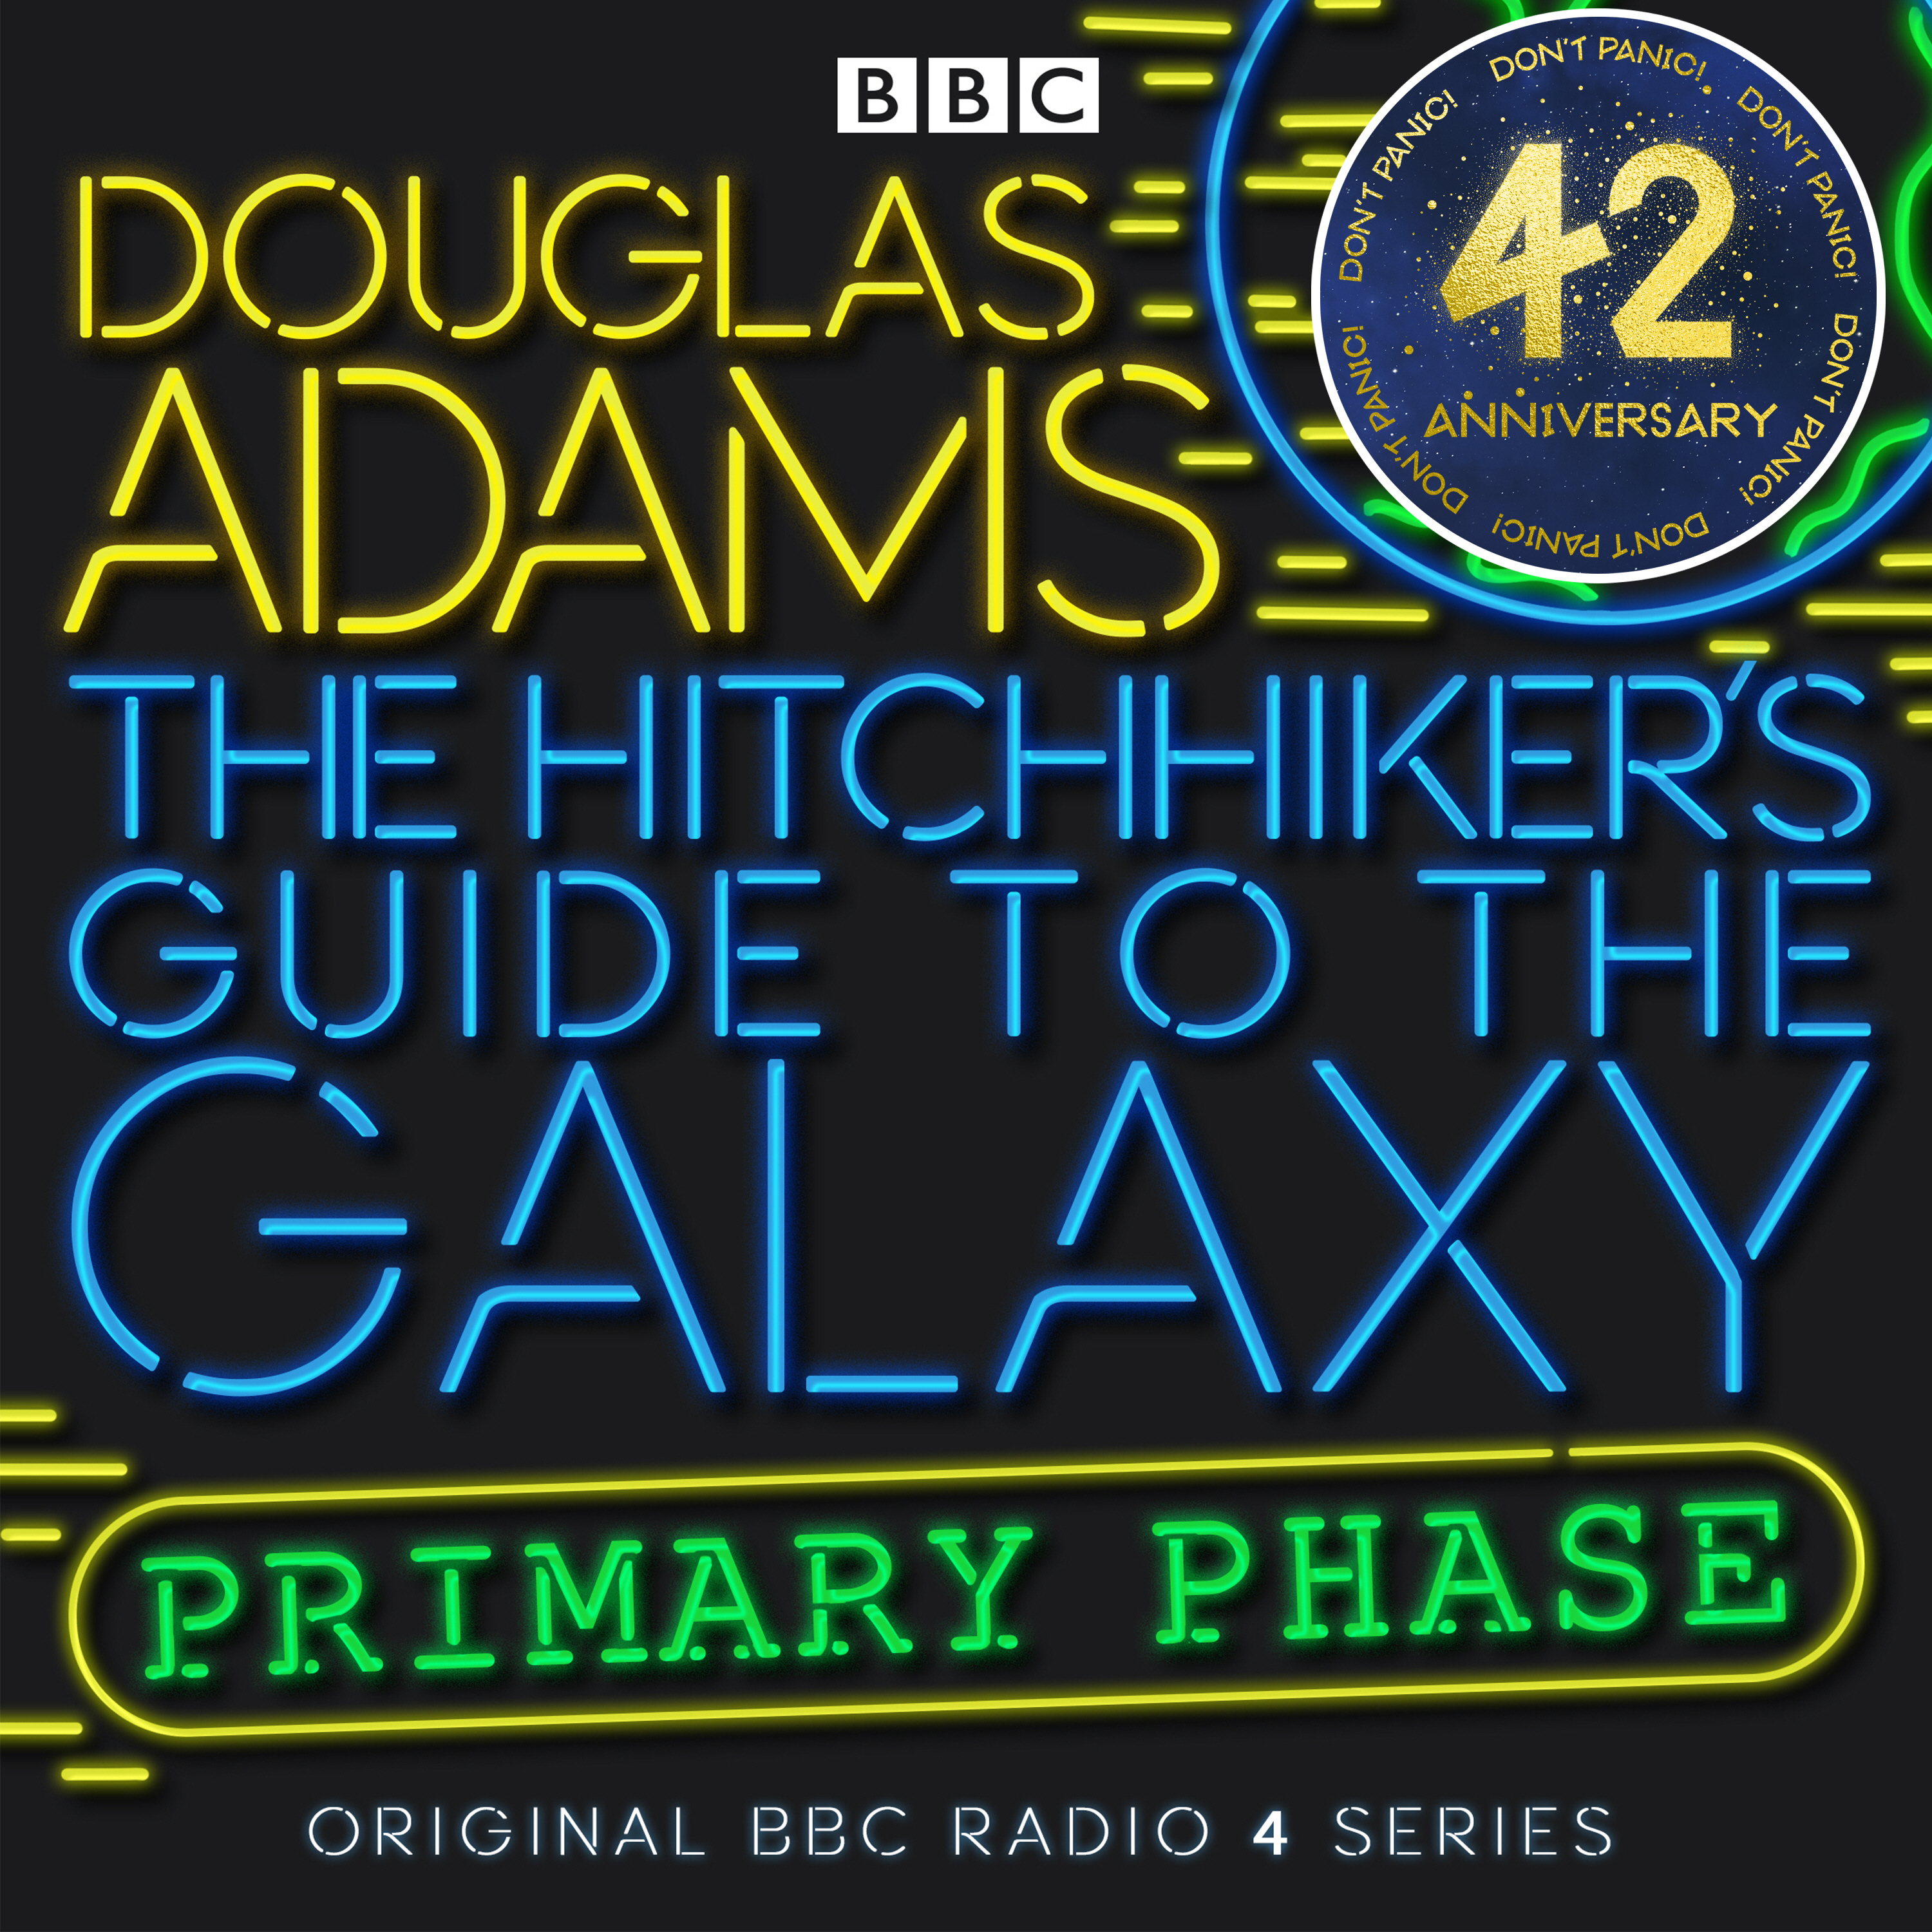 Audiobook cover for The Hitchhiker's Guide to the Galaxy: black cover with the author's name at the top in yellow neon. The title below it in blue neon, and "Primary Phase" at the bottom in green neon.